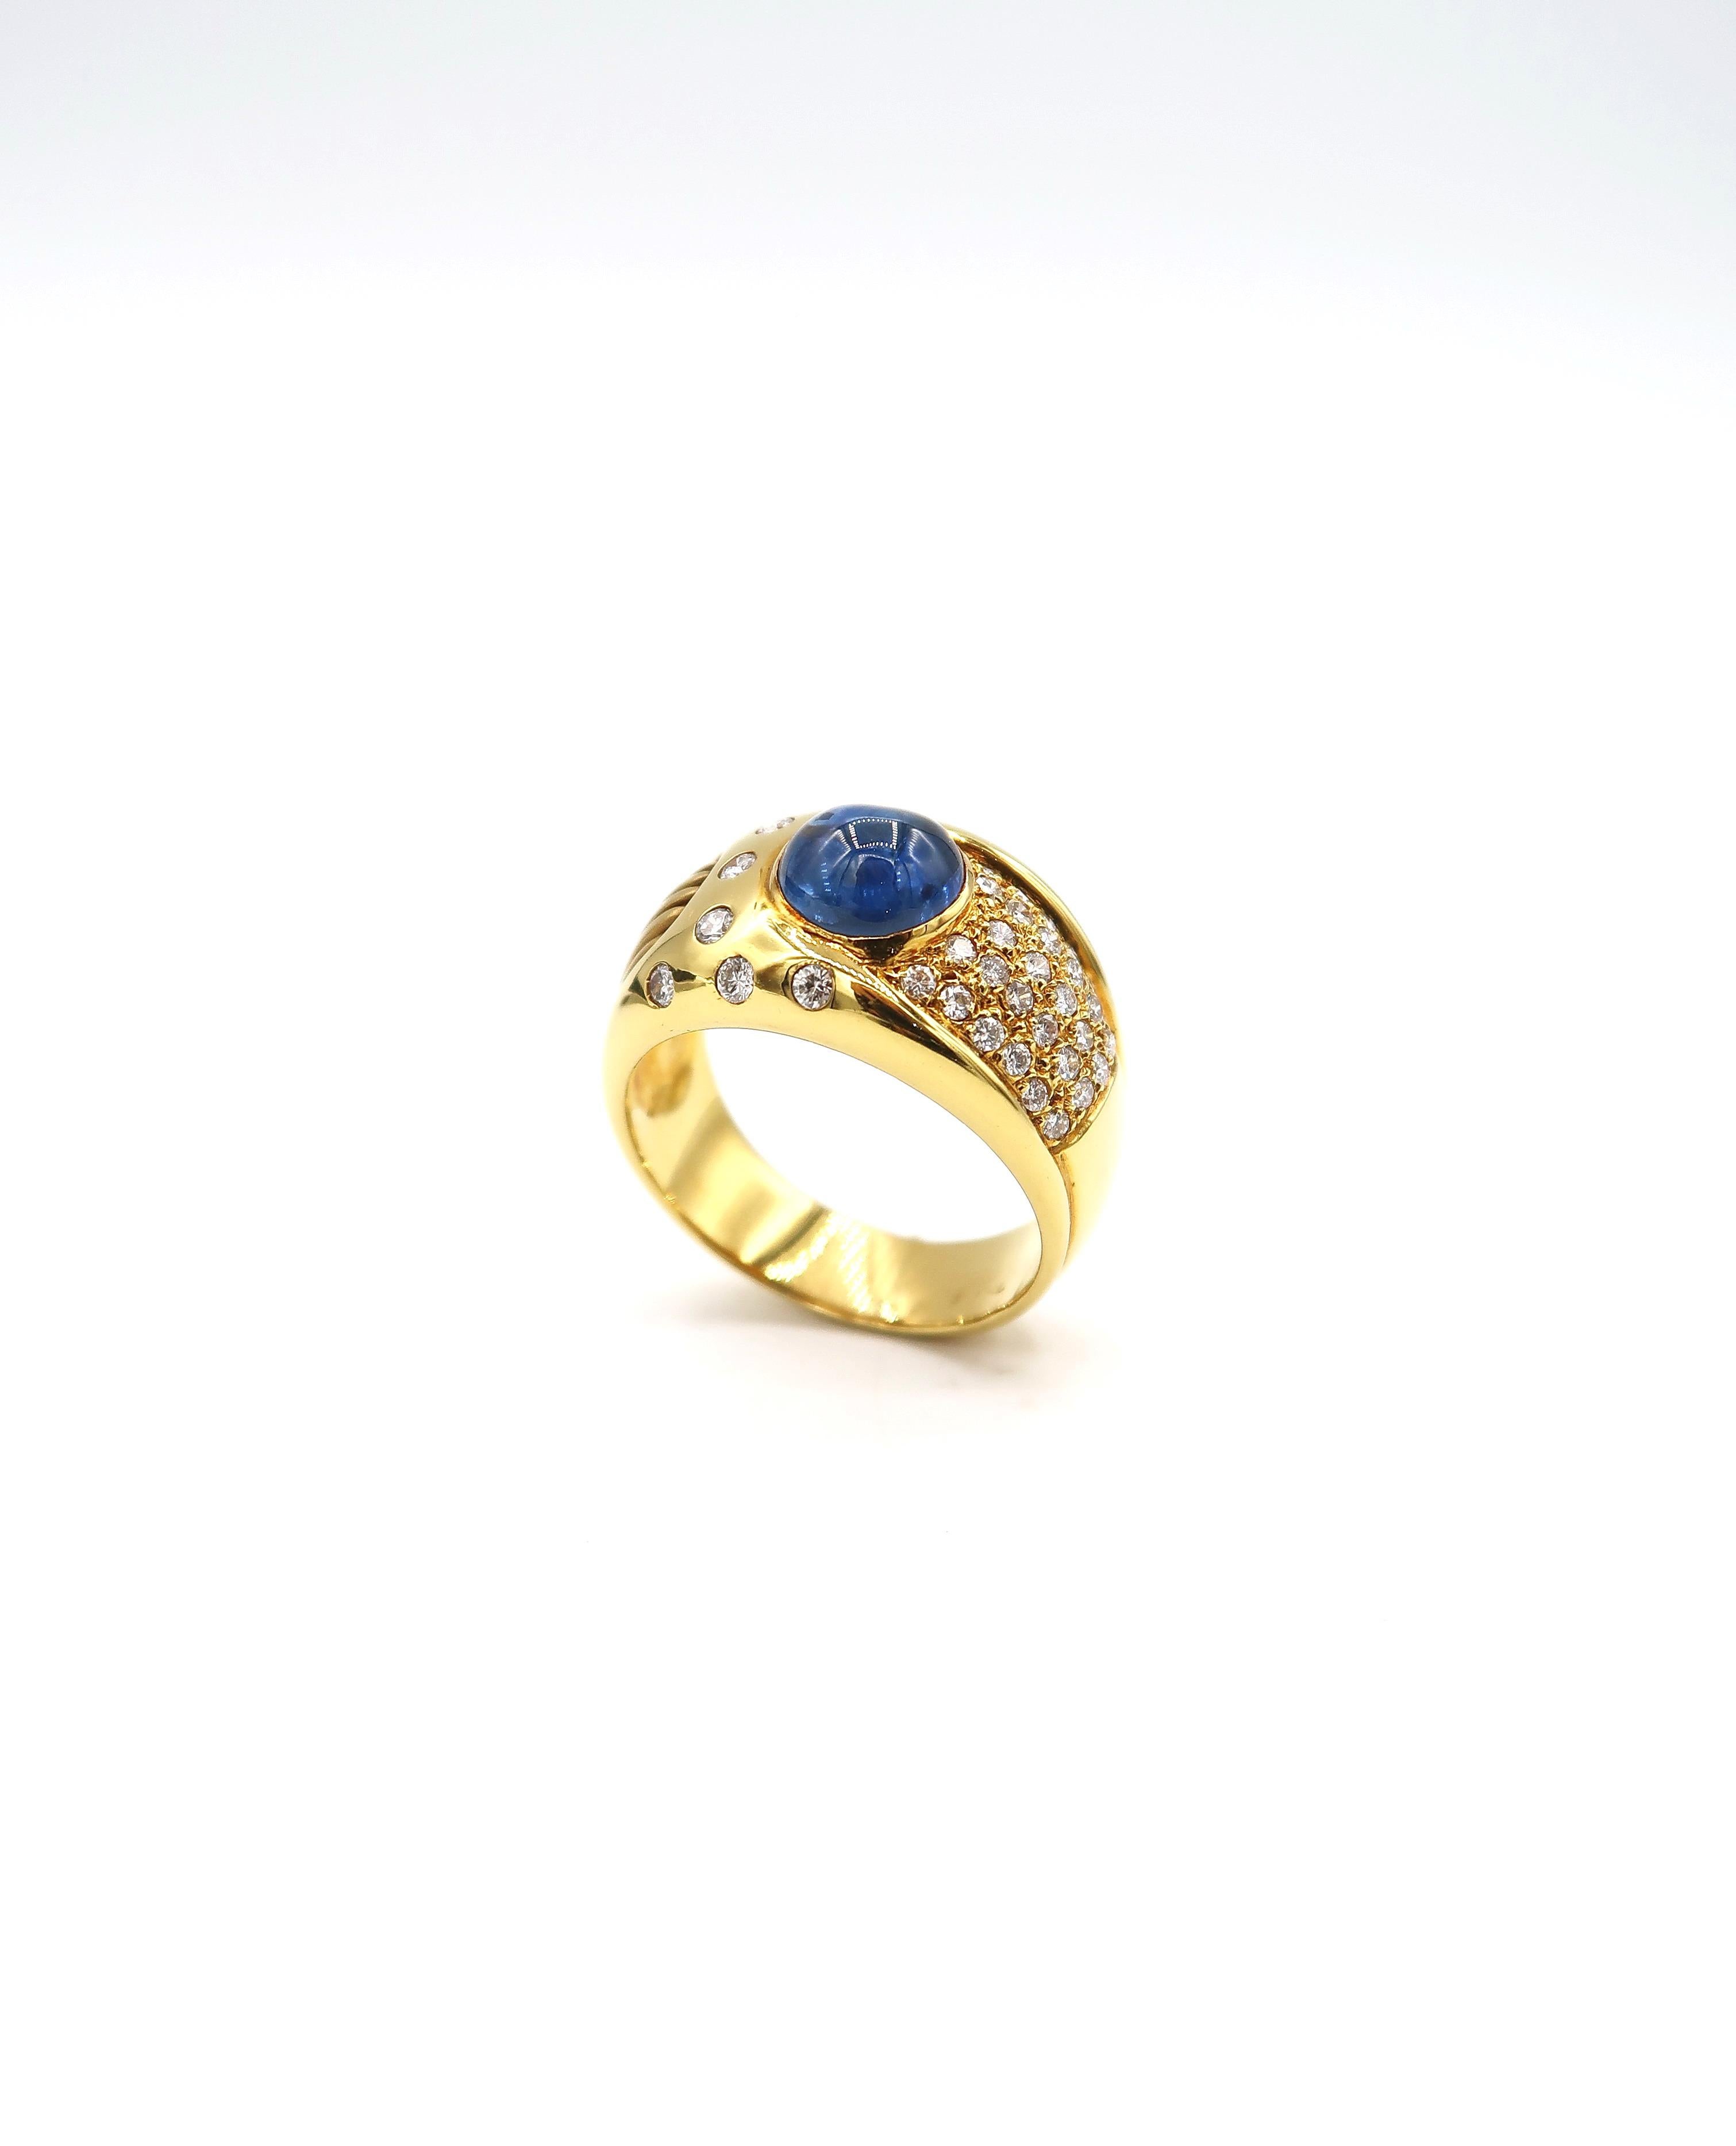 2.55 Carat Cabochon Sapphire Wide Band in 18 Karat Yellow Gold with Diamonds

Ring size: US 9, UK R

Gold: 18K 10.454g.
Sapphire: 2.55cts.
Diamond: 0.79ct.